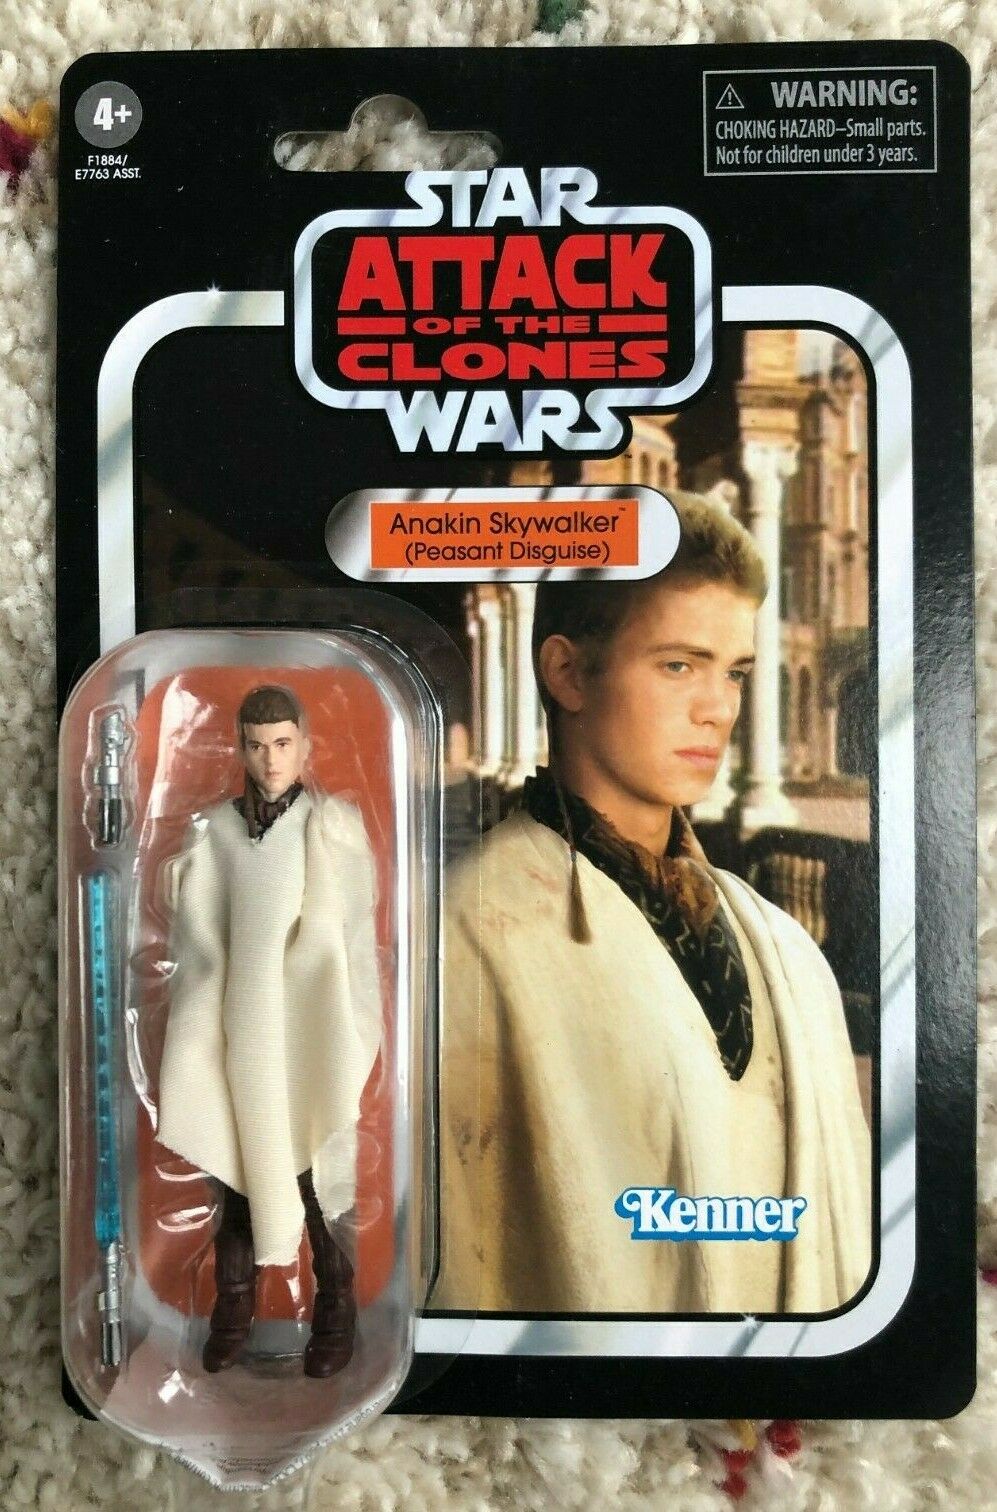 STAR WARS Attack of the Clones - TVC Vintage Collection VC32 - Anakin Skywalker